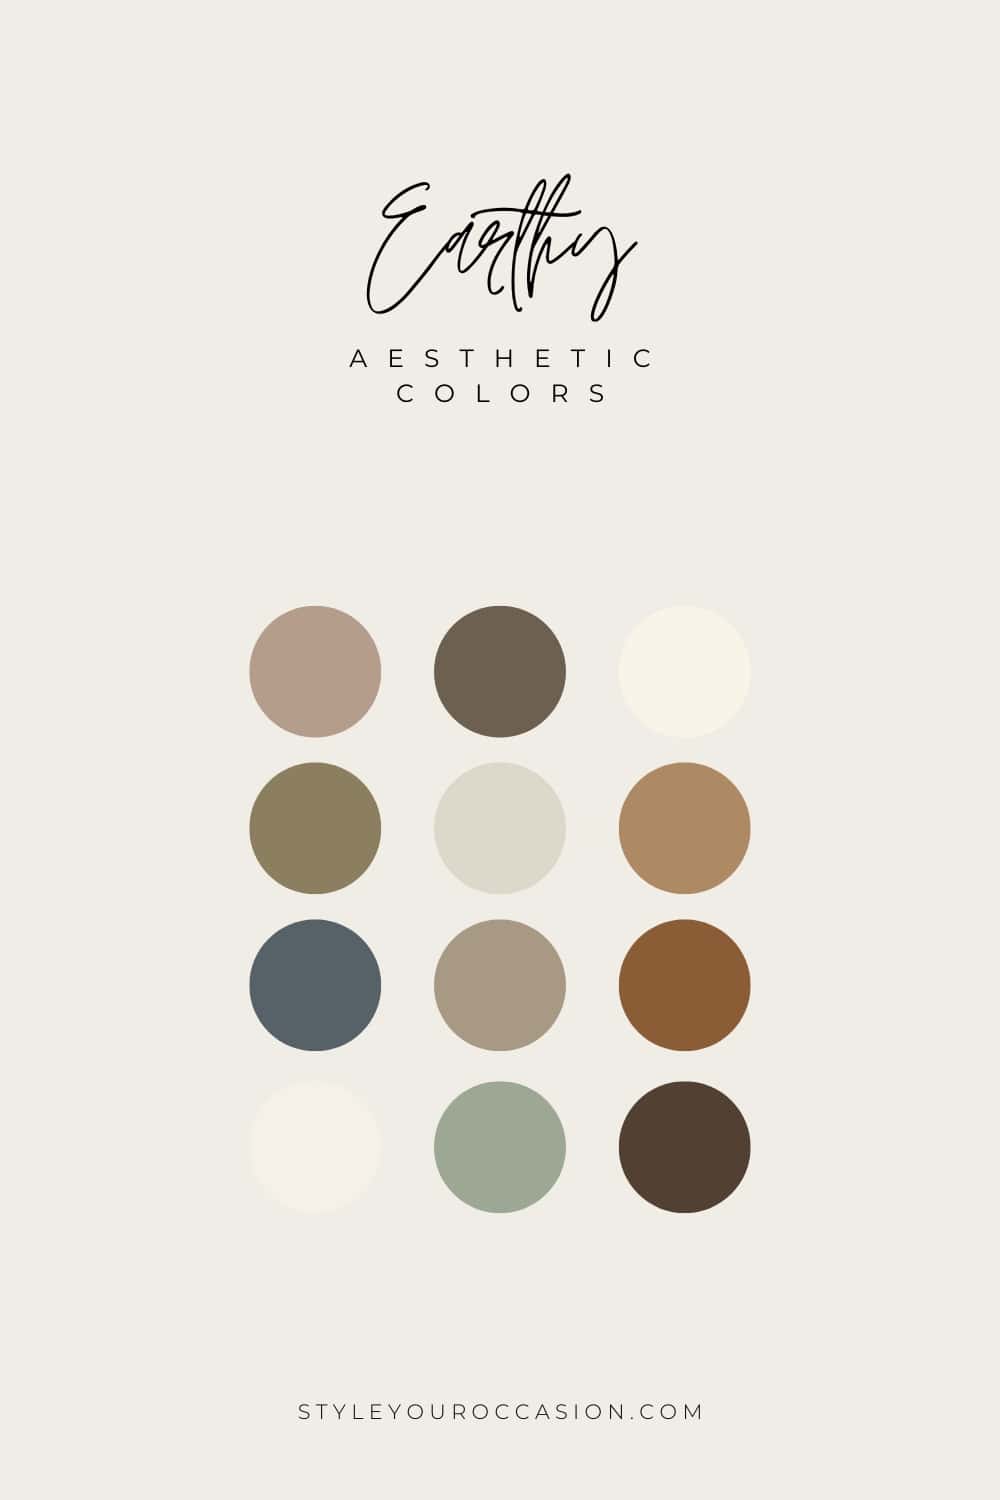 image of a color palette of earth tones